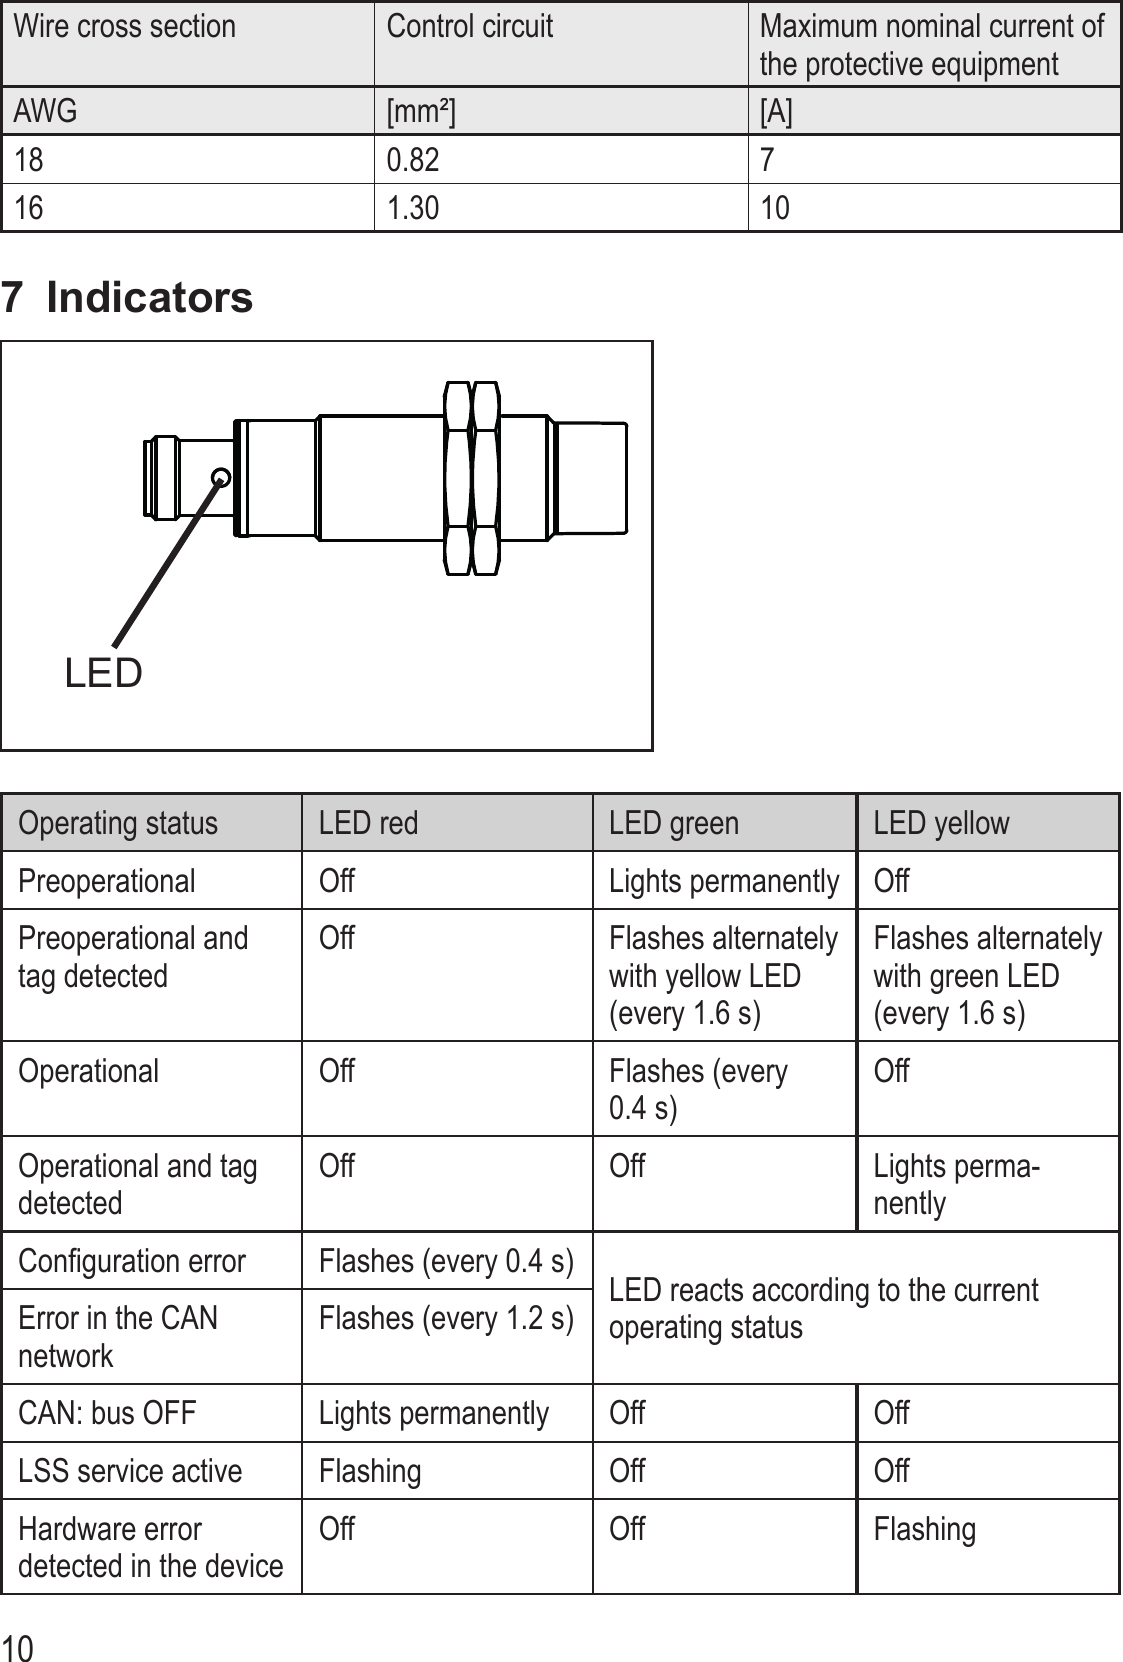 10Wire cross section Control circuit Maximum nominal current of the protective equipmentAWG [mm²] [A]18 0�82 716 1�30 107  IndicatorsLEDOperating status LED red LED green LED yellowPreoperational Off Lights permanently OffPreoperational andtag detectedOff Flashes alternately with yellow LED (every 1�6 s)Flashes alternately with green LED (every 1�6 s)Operational Off Flashes (every 0�4 s)OffOperational and tag detectedOff Off Lights perma-nentlyConfiguration error Flashes (every 0�4 s) LED reacts according to the current operating statusError in the CAN networkFlashes (every 1�2 s)CAN: bus OFF Lights permanently Off OffLSS service active Flashing Off OffHardware error detected in the deviceOff Off Flashing